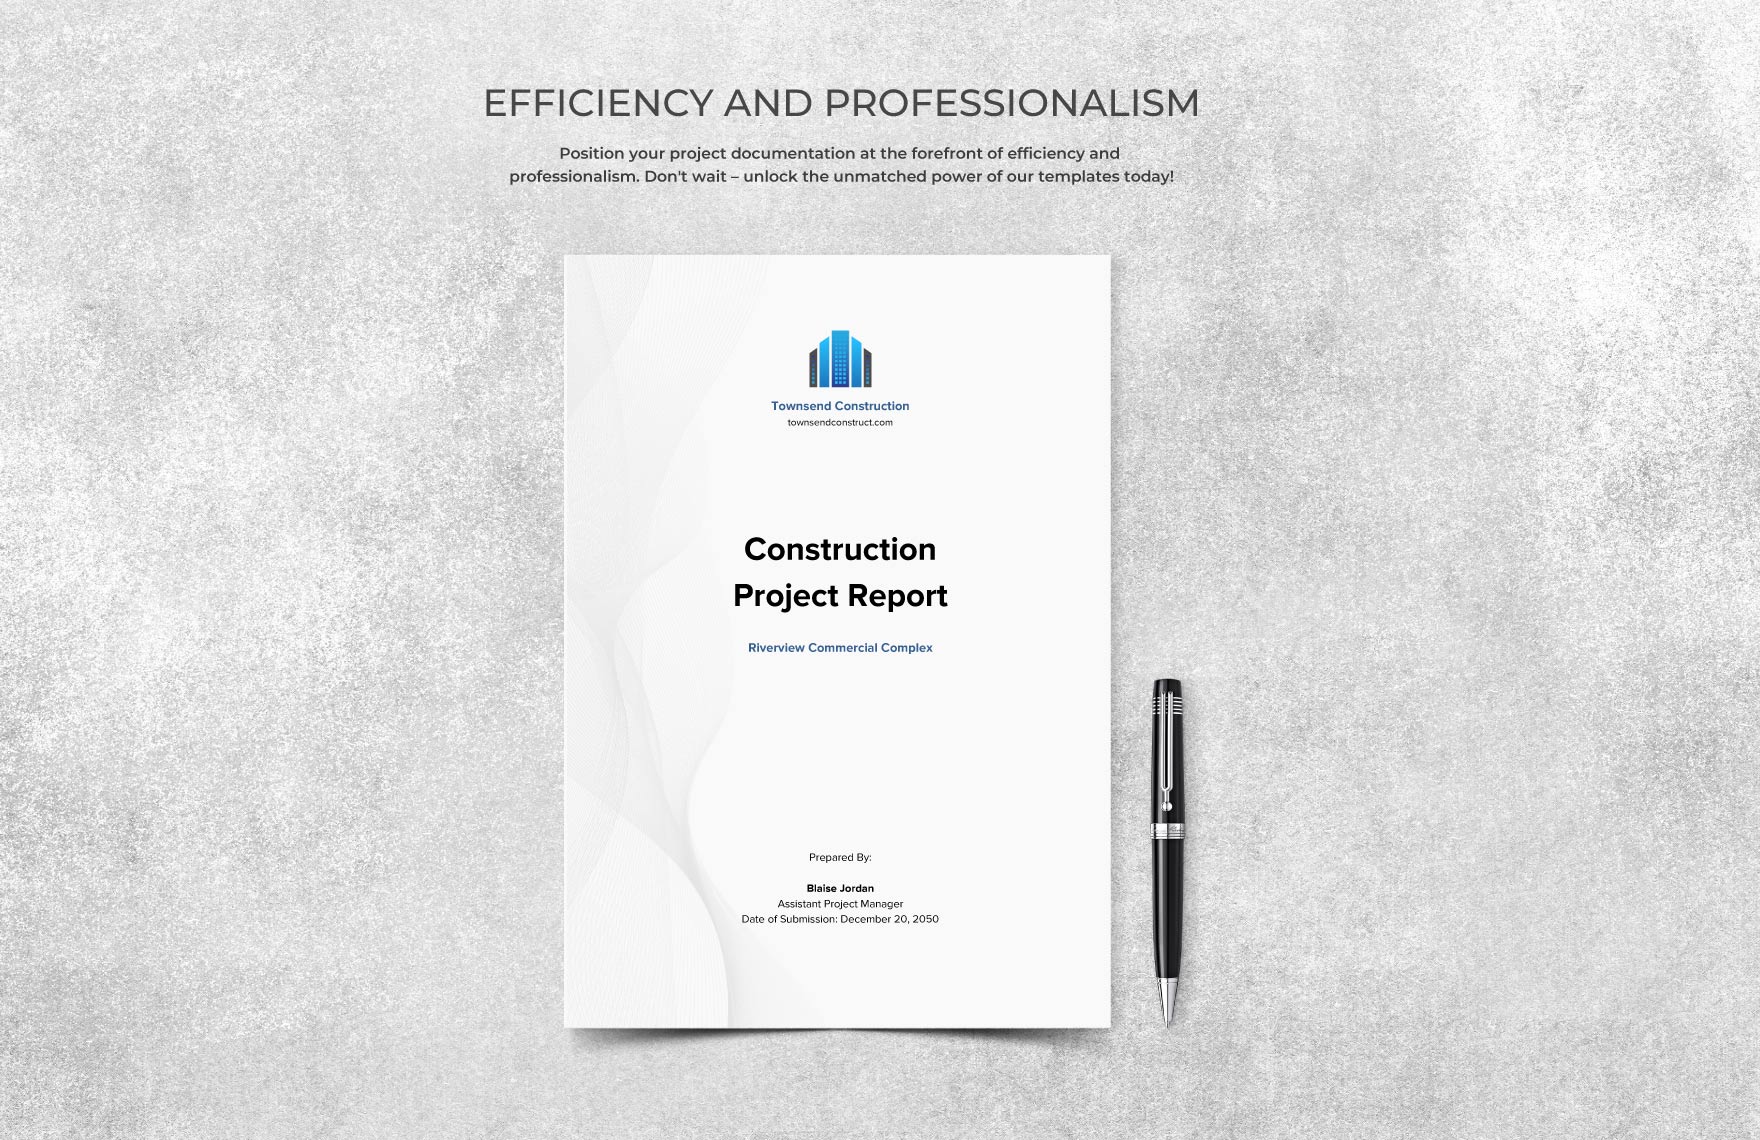 Construction Project Report Template